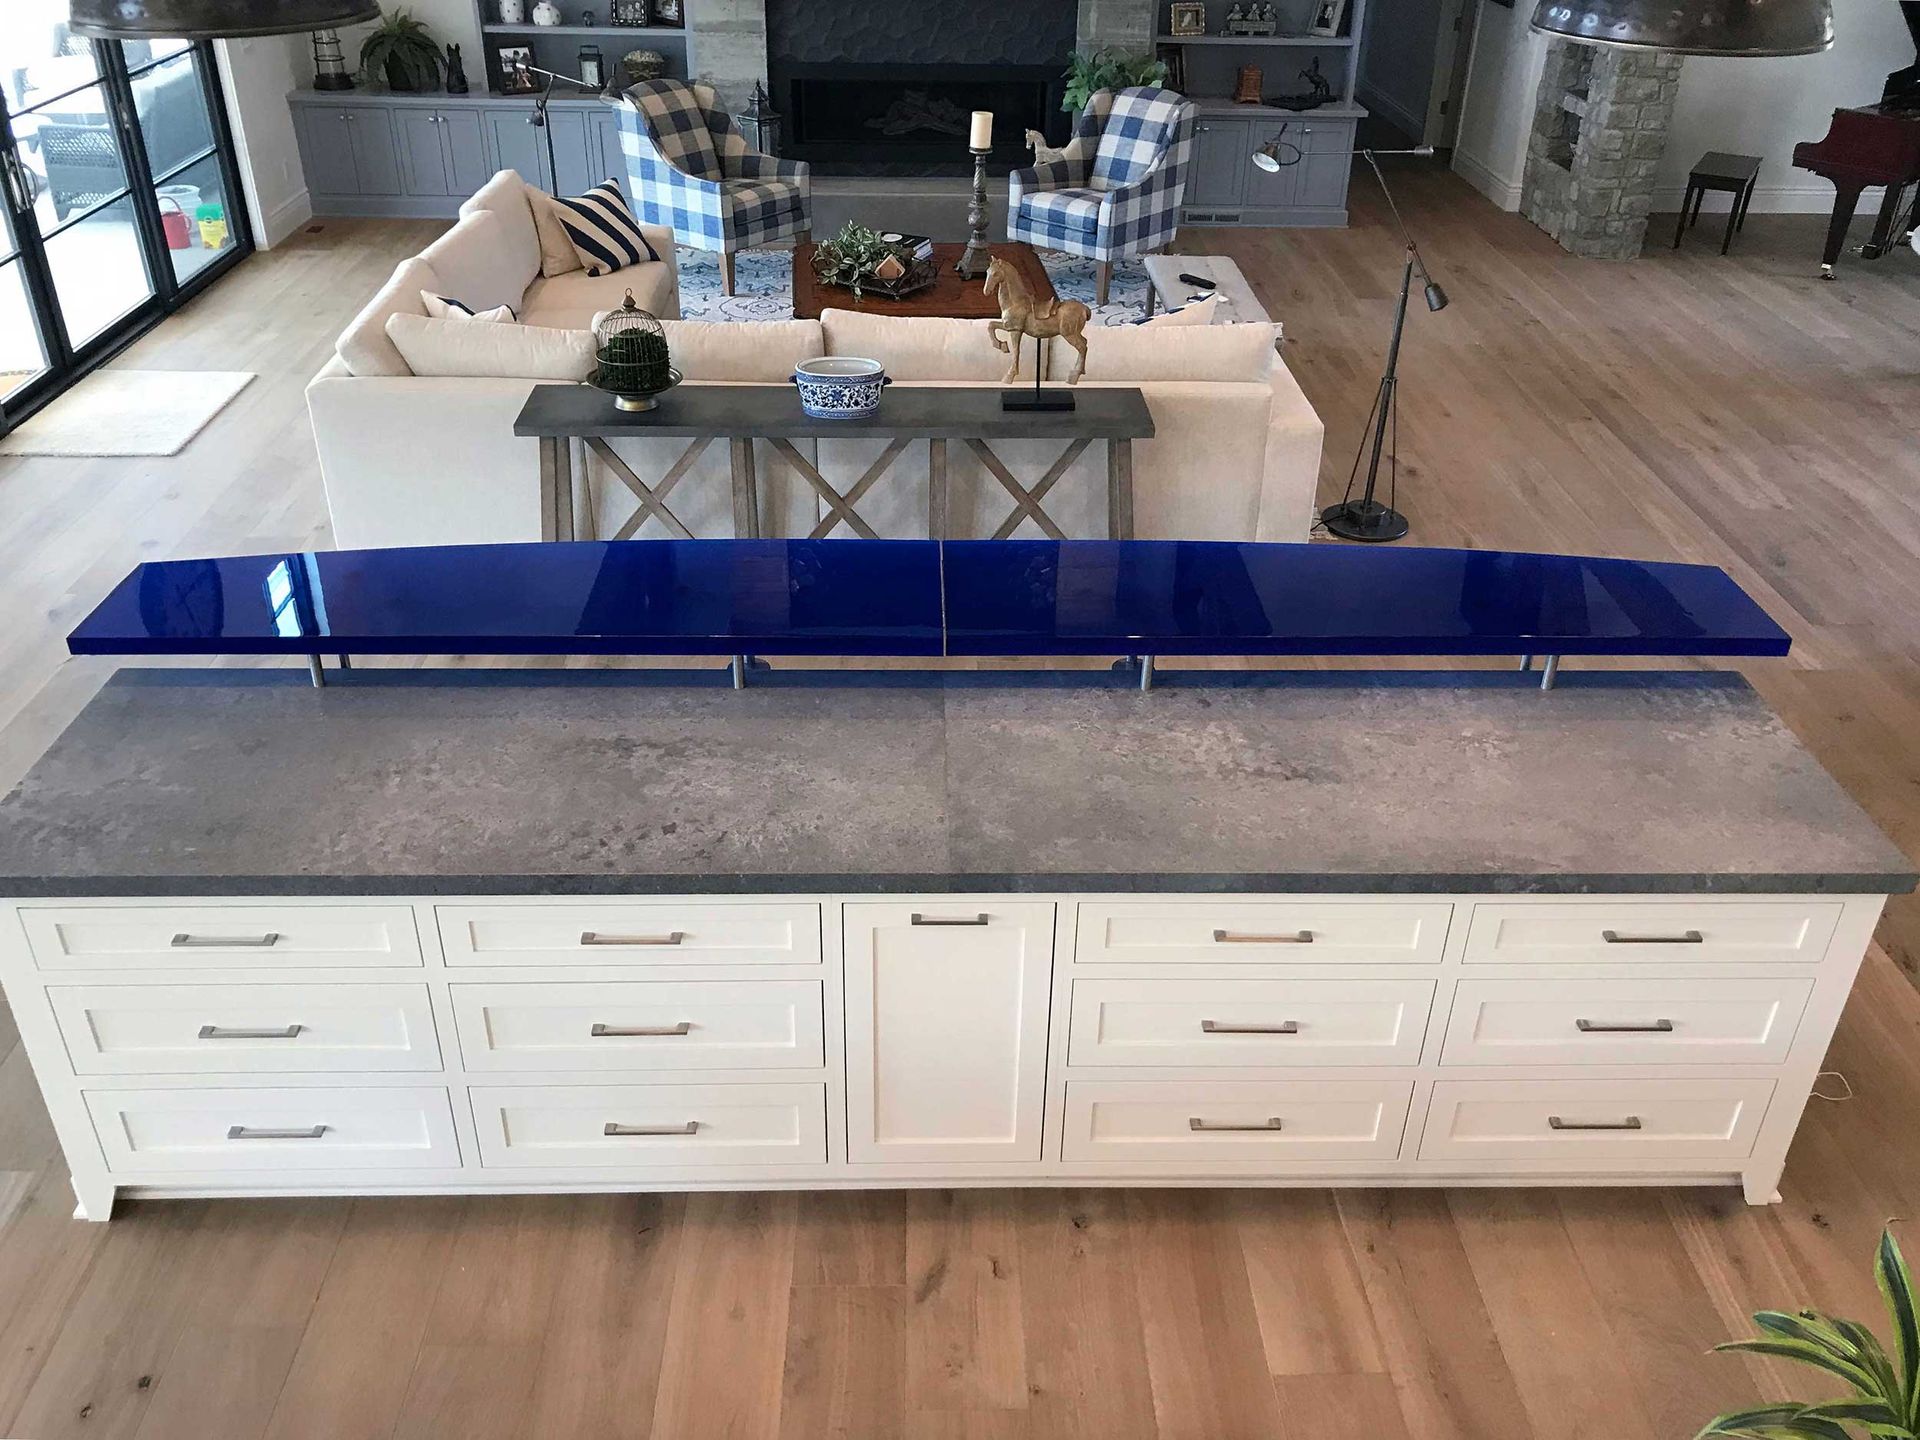 Thick blue glass countertop.